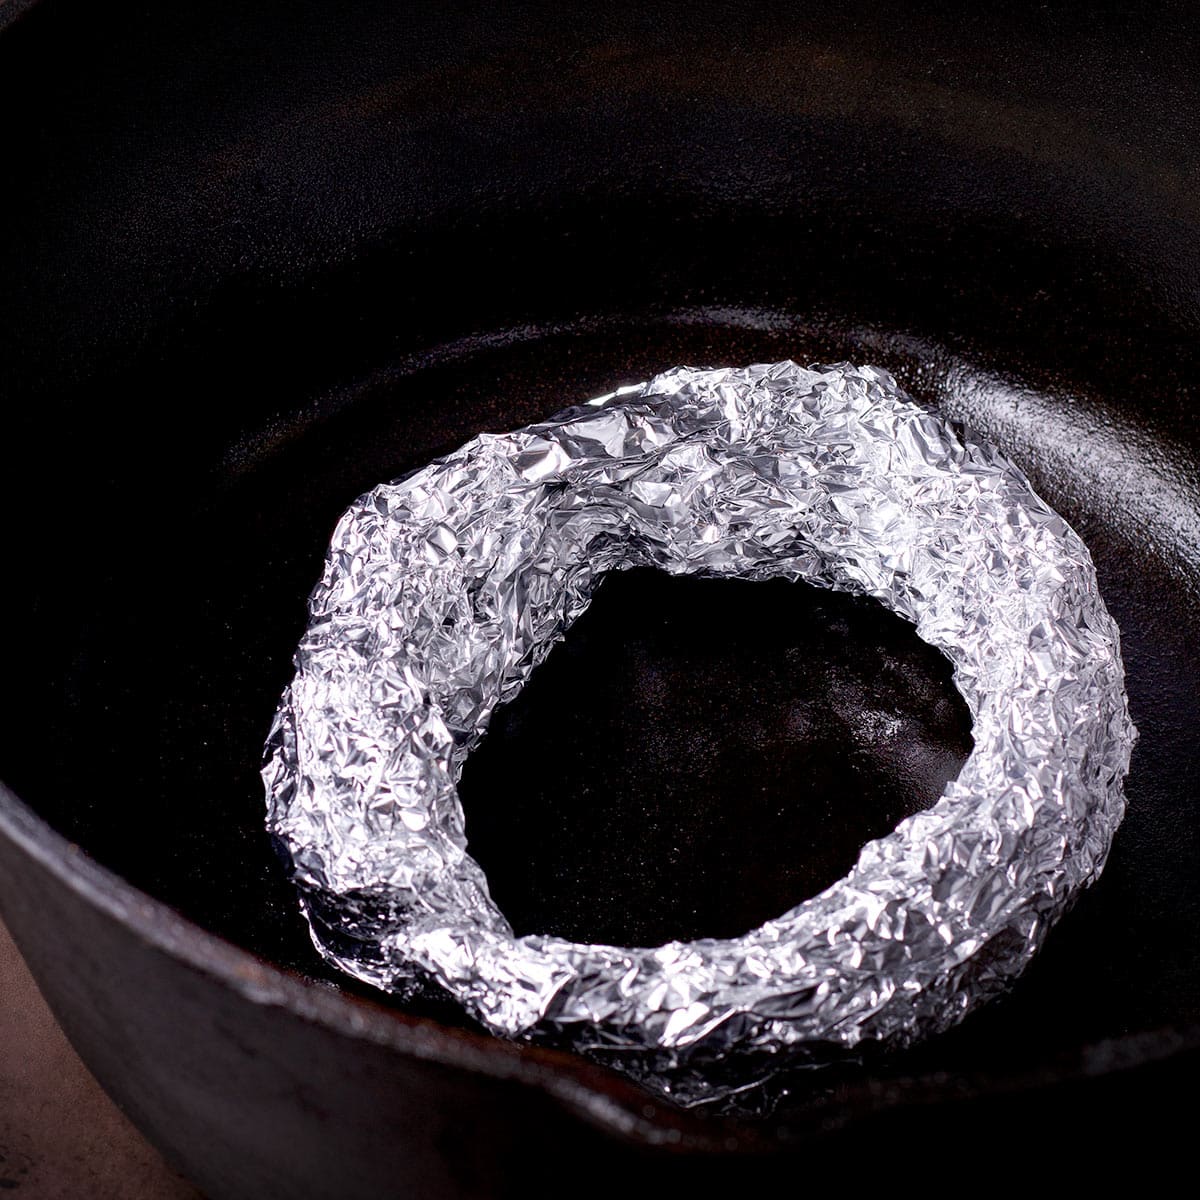 A ring of foil placed on the bottom of a Dutch oven.